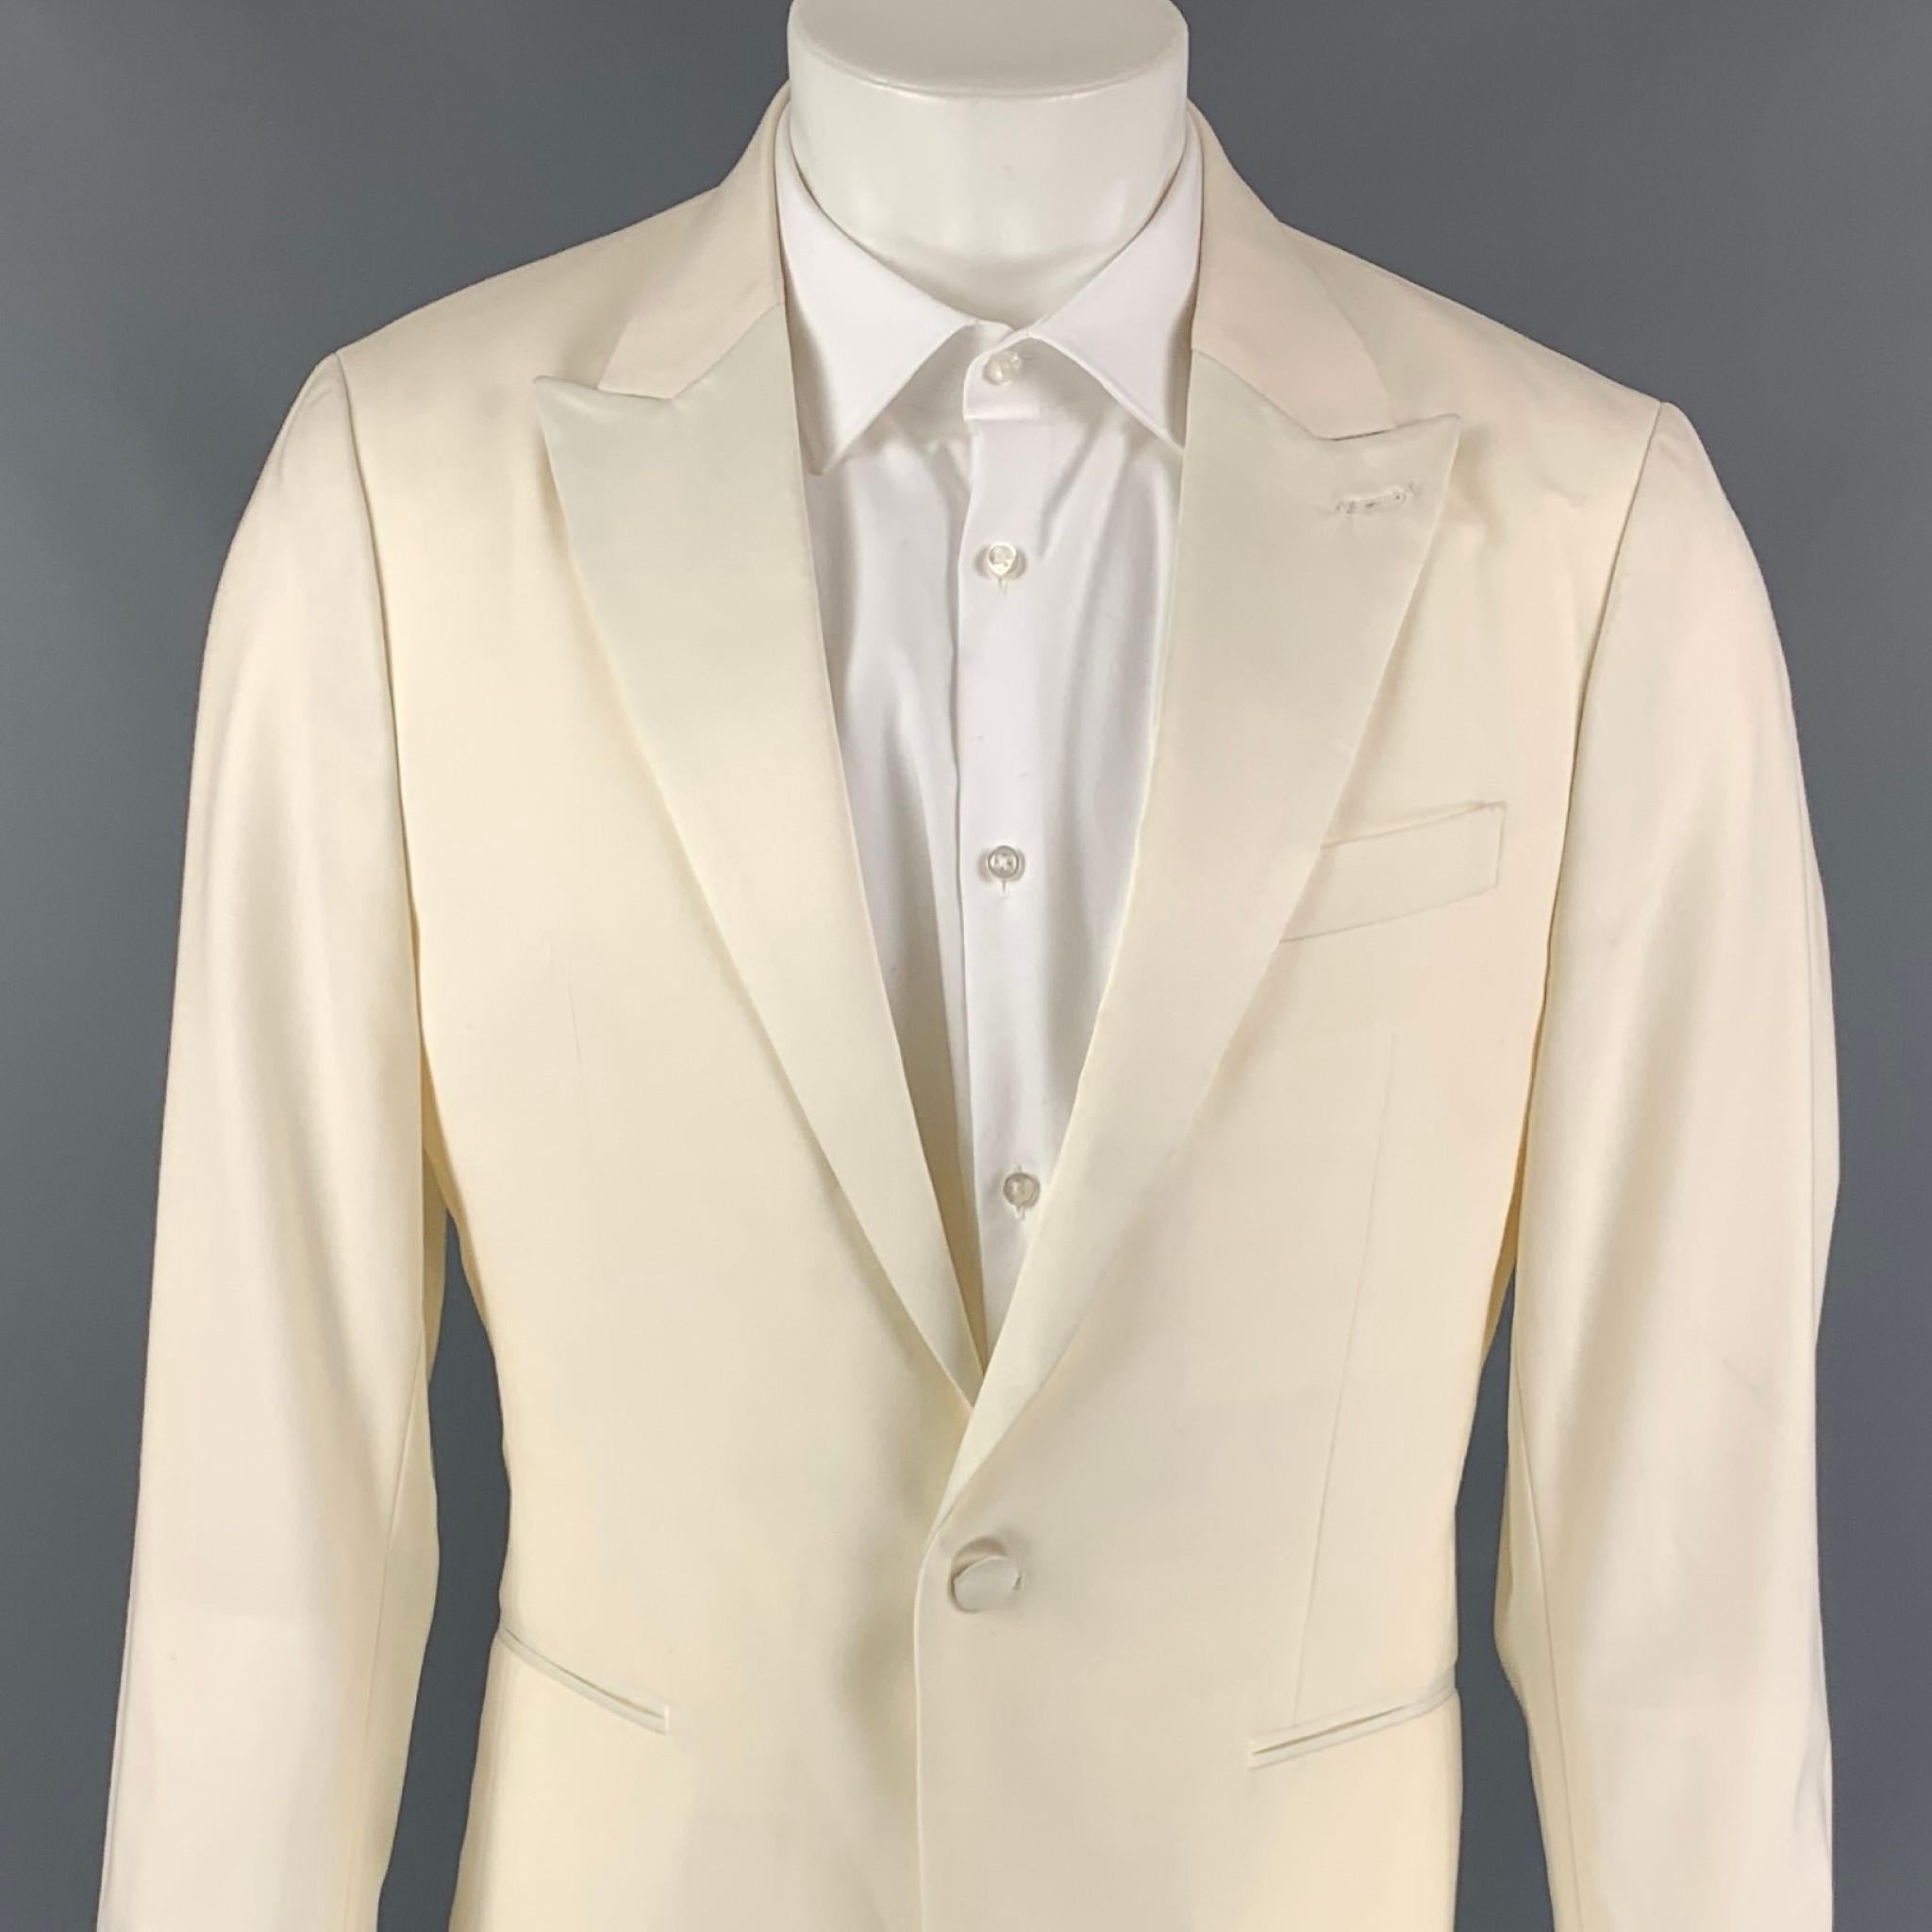 THEORY Fall 18 sport coat comes in a off white wool with a full liner featuring a peak lapel, slit pockets, double back vent, and a single button closure. 

Very Good Pre-Owned Condition. Light marks at sleeve.
Marked: 40 R

Measurements:

Shoulder: